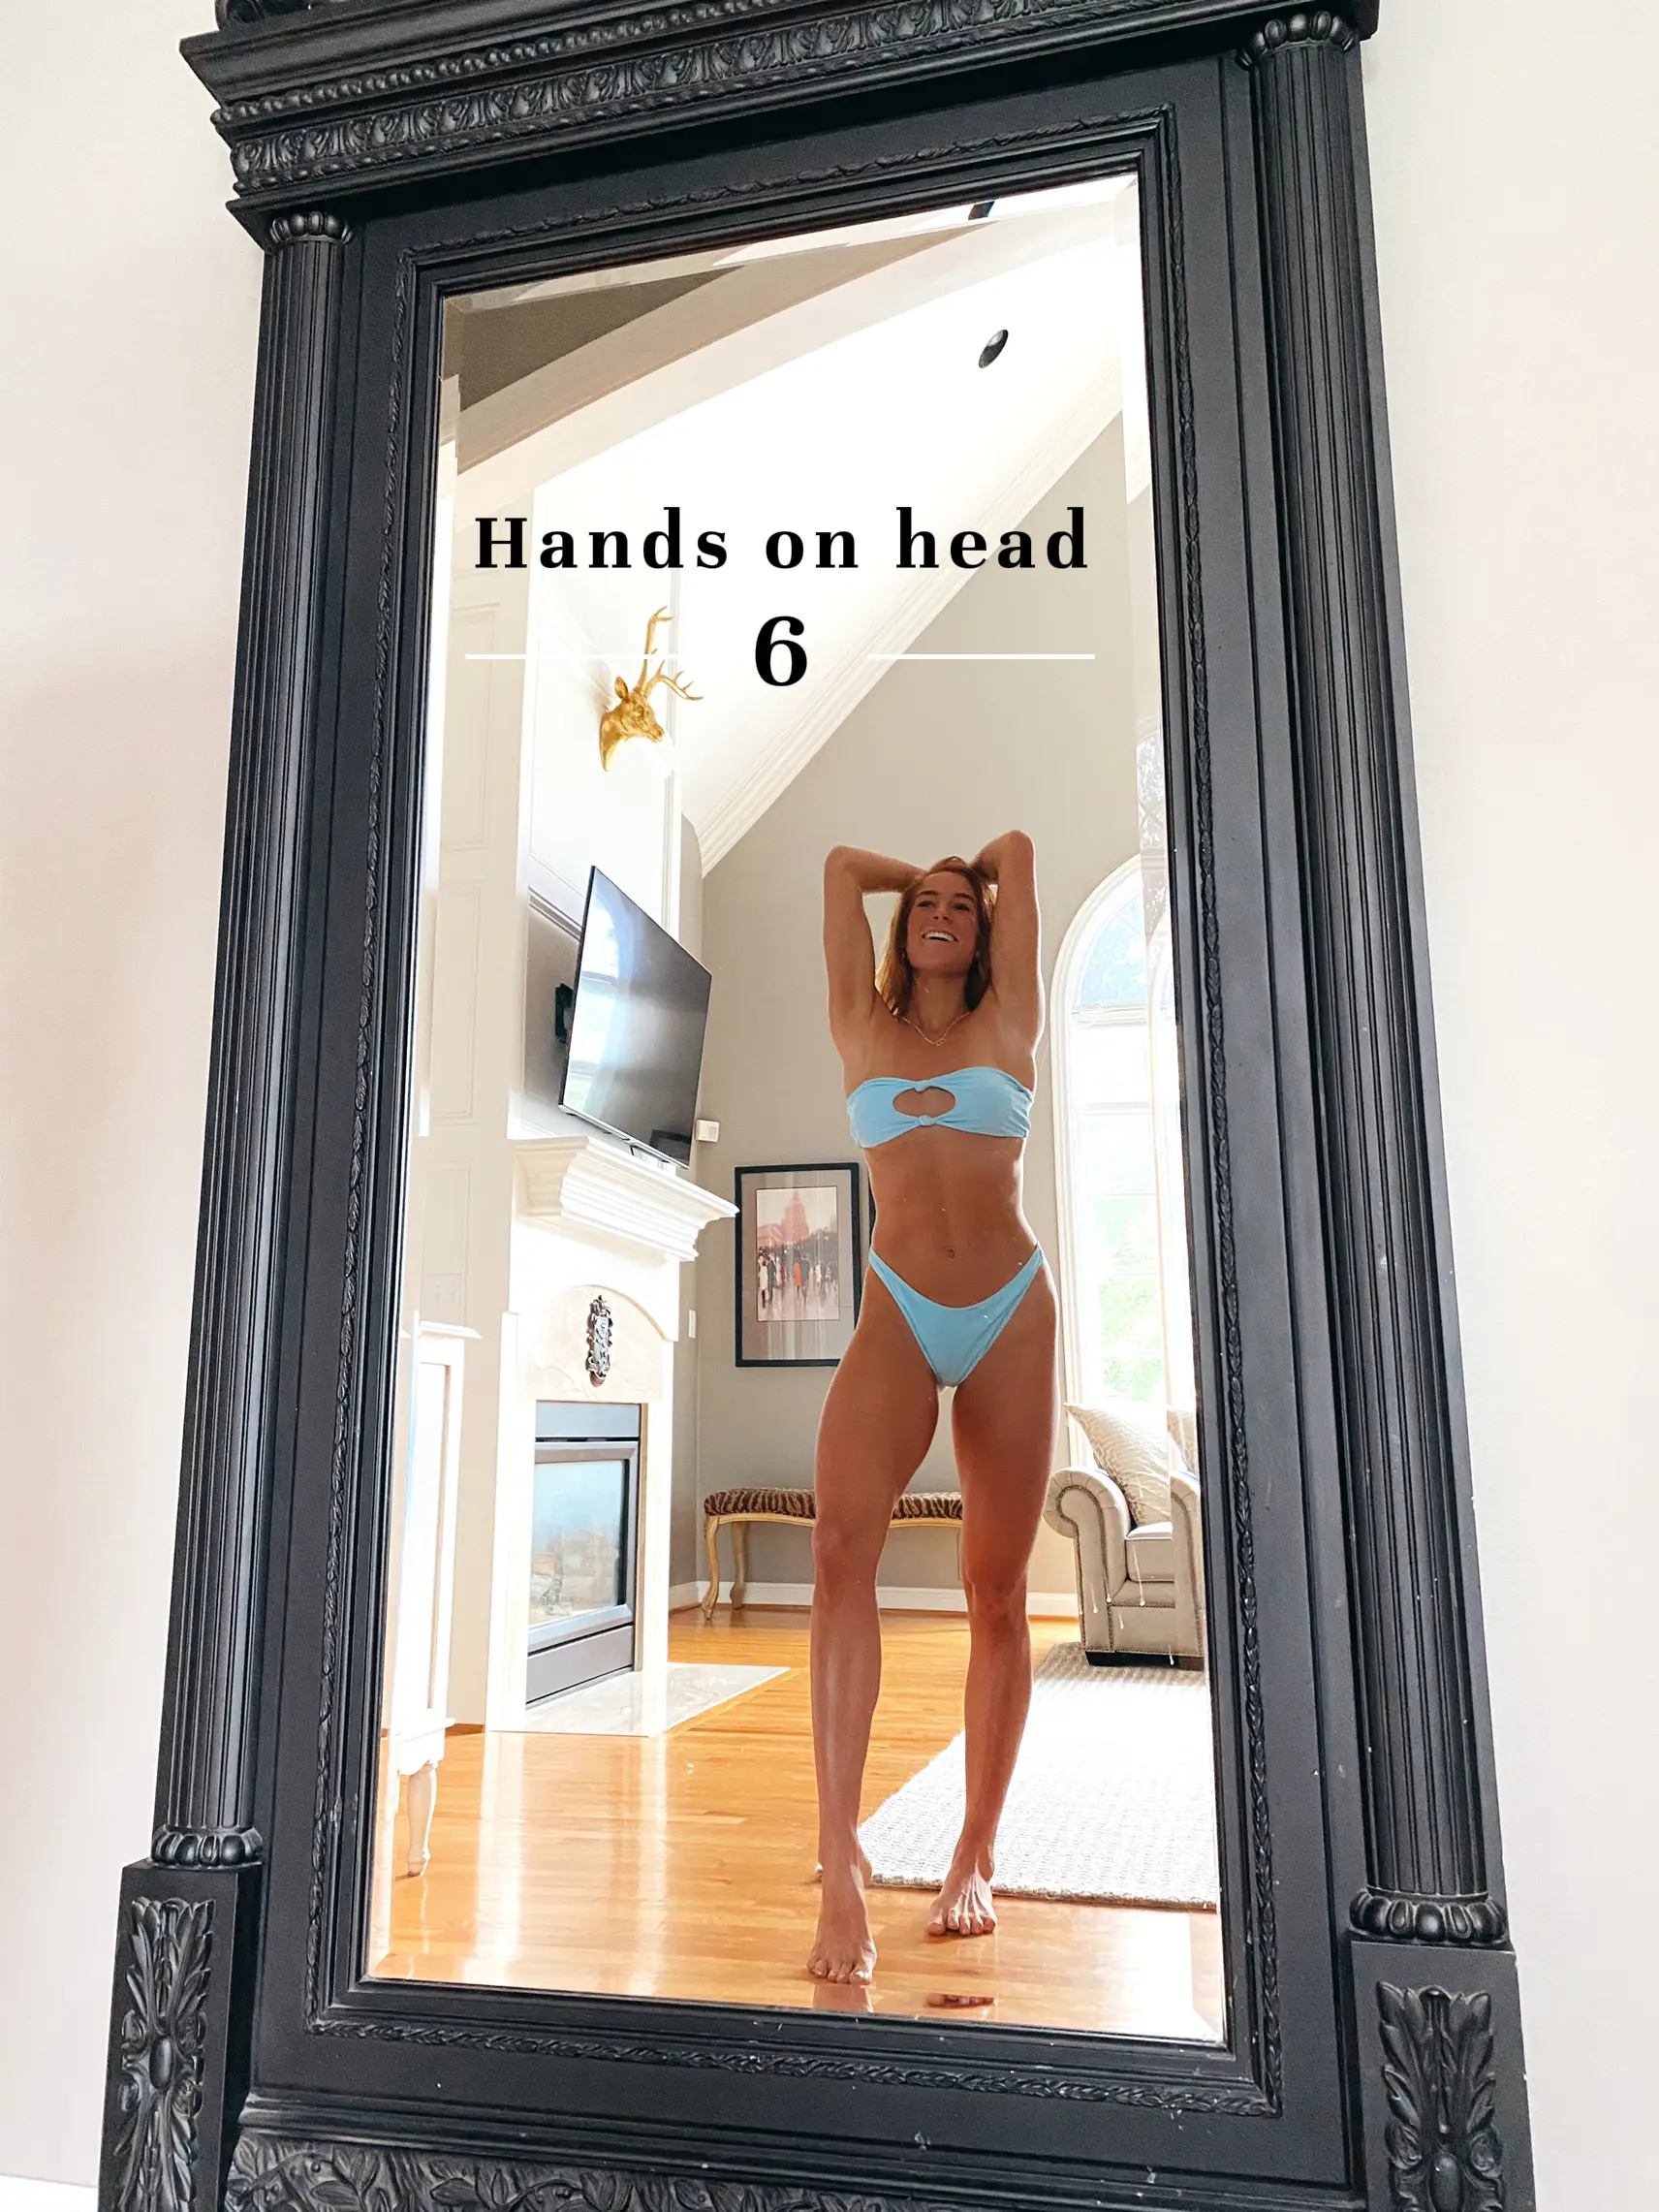  A woman in a bikini is standing in front of a mirror.